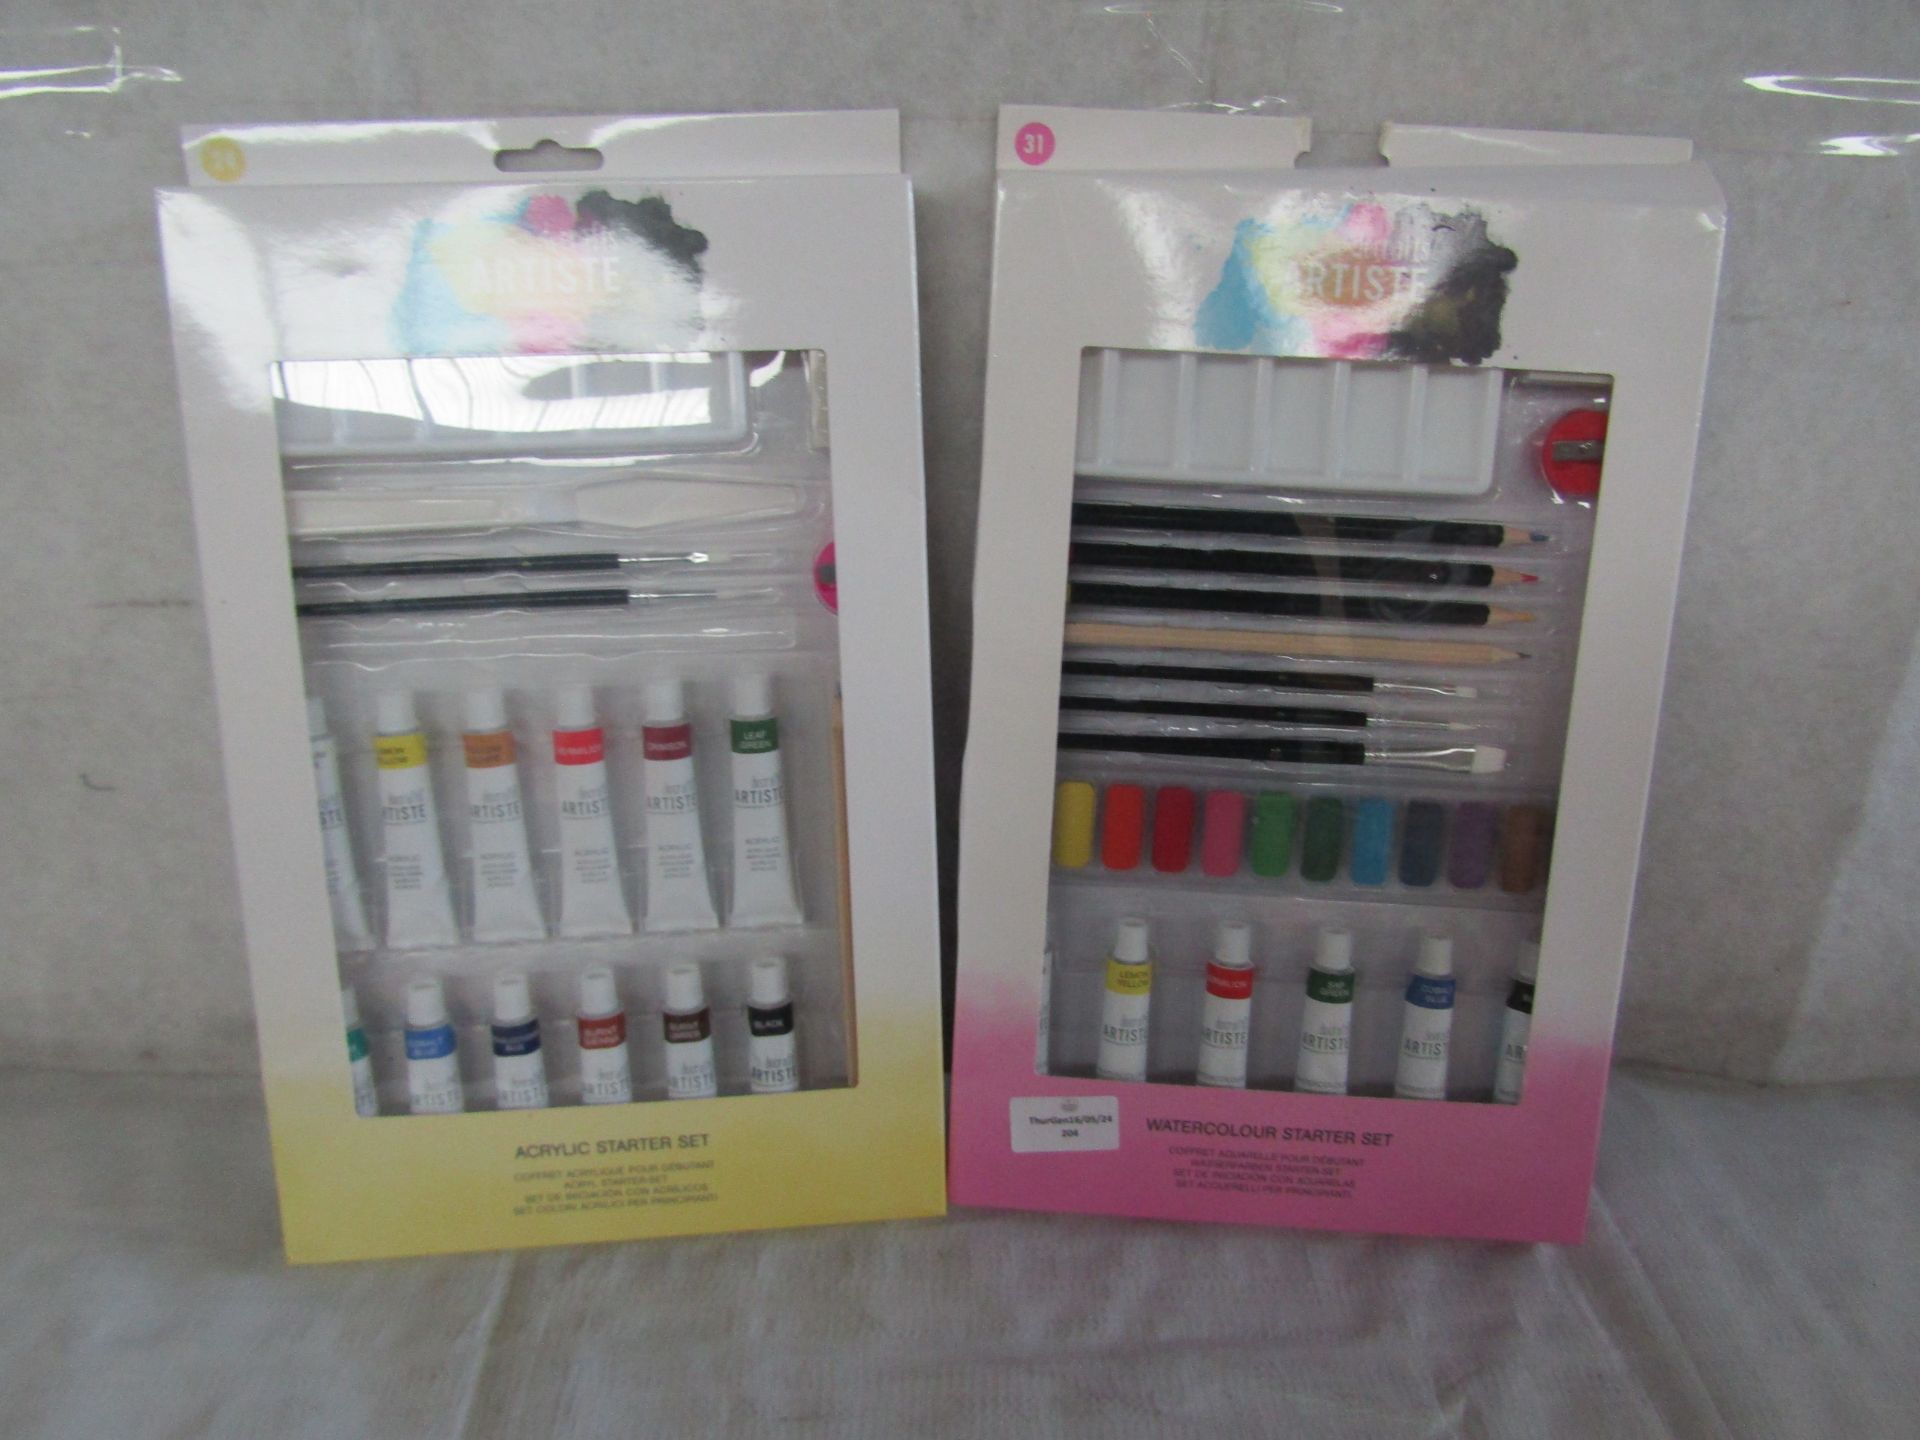 1X DoCrafts - Watercolour Starter Kit - Boxed. 1X DoCrafts - Acrylic Starter Kit - Boxed.